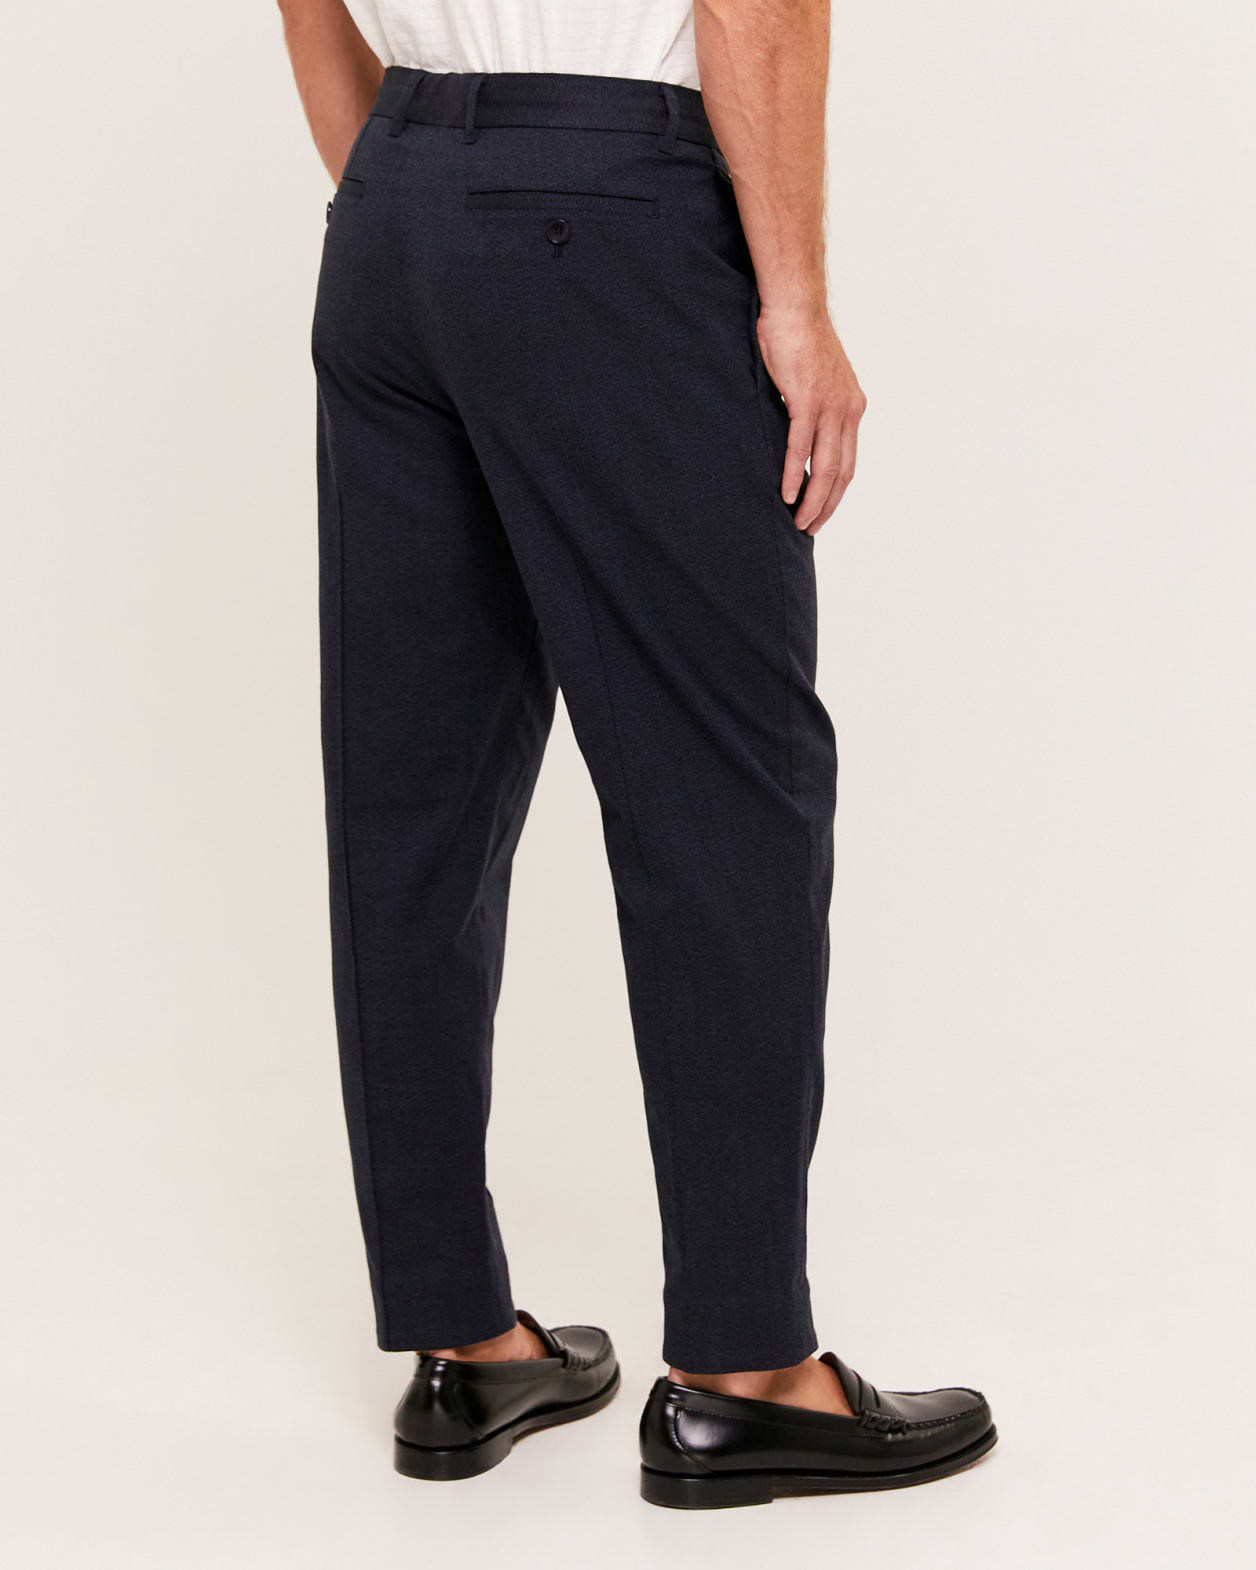 Hershall Item Pant in NAVY